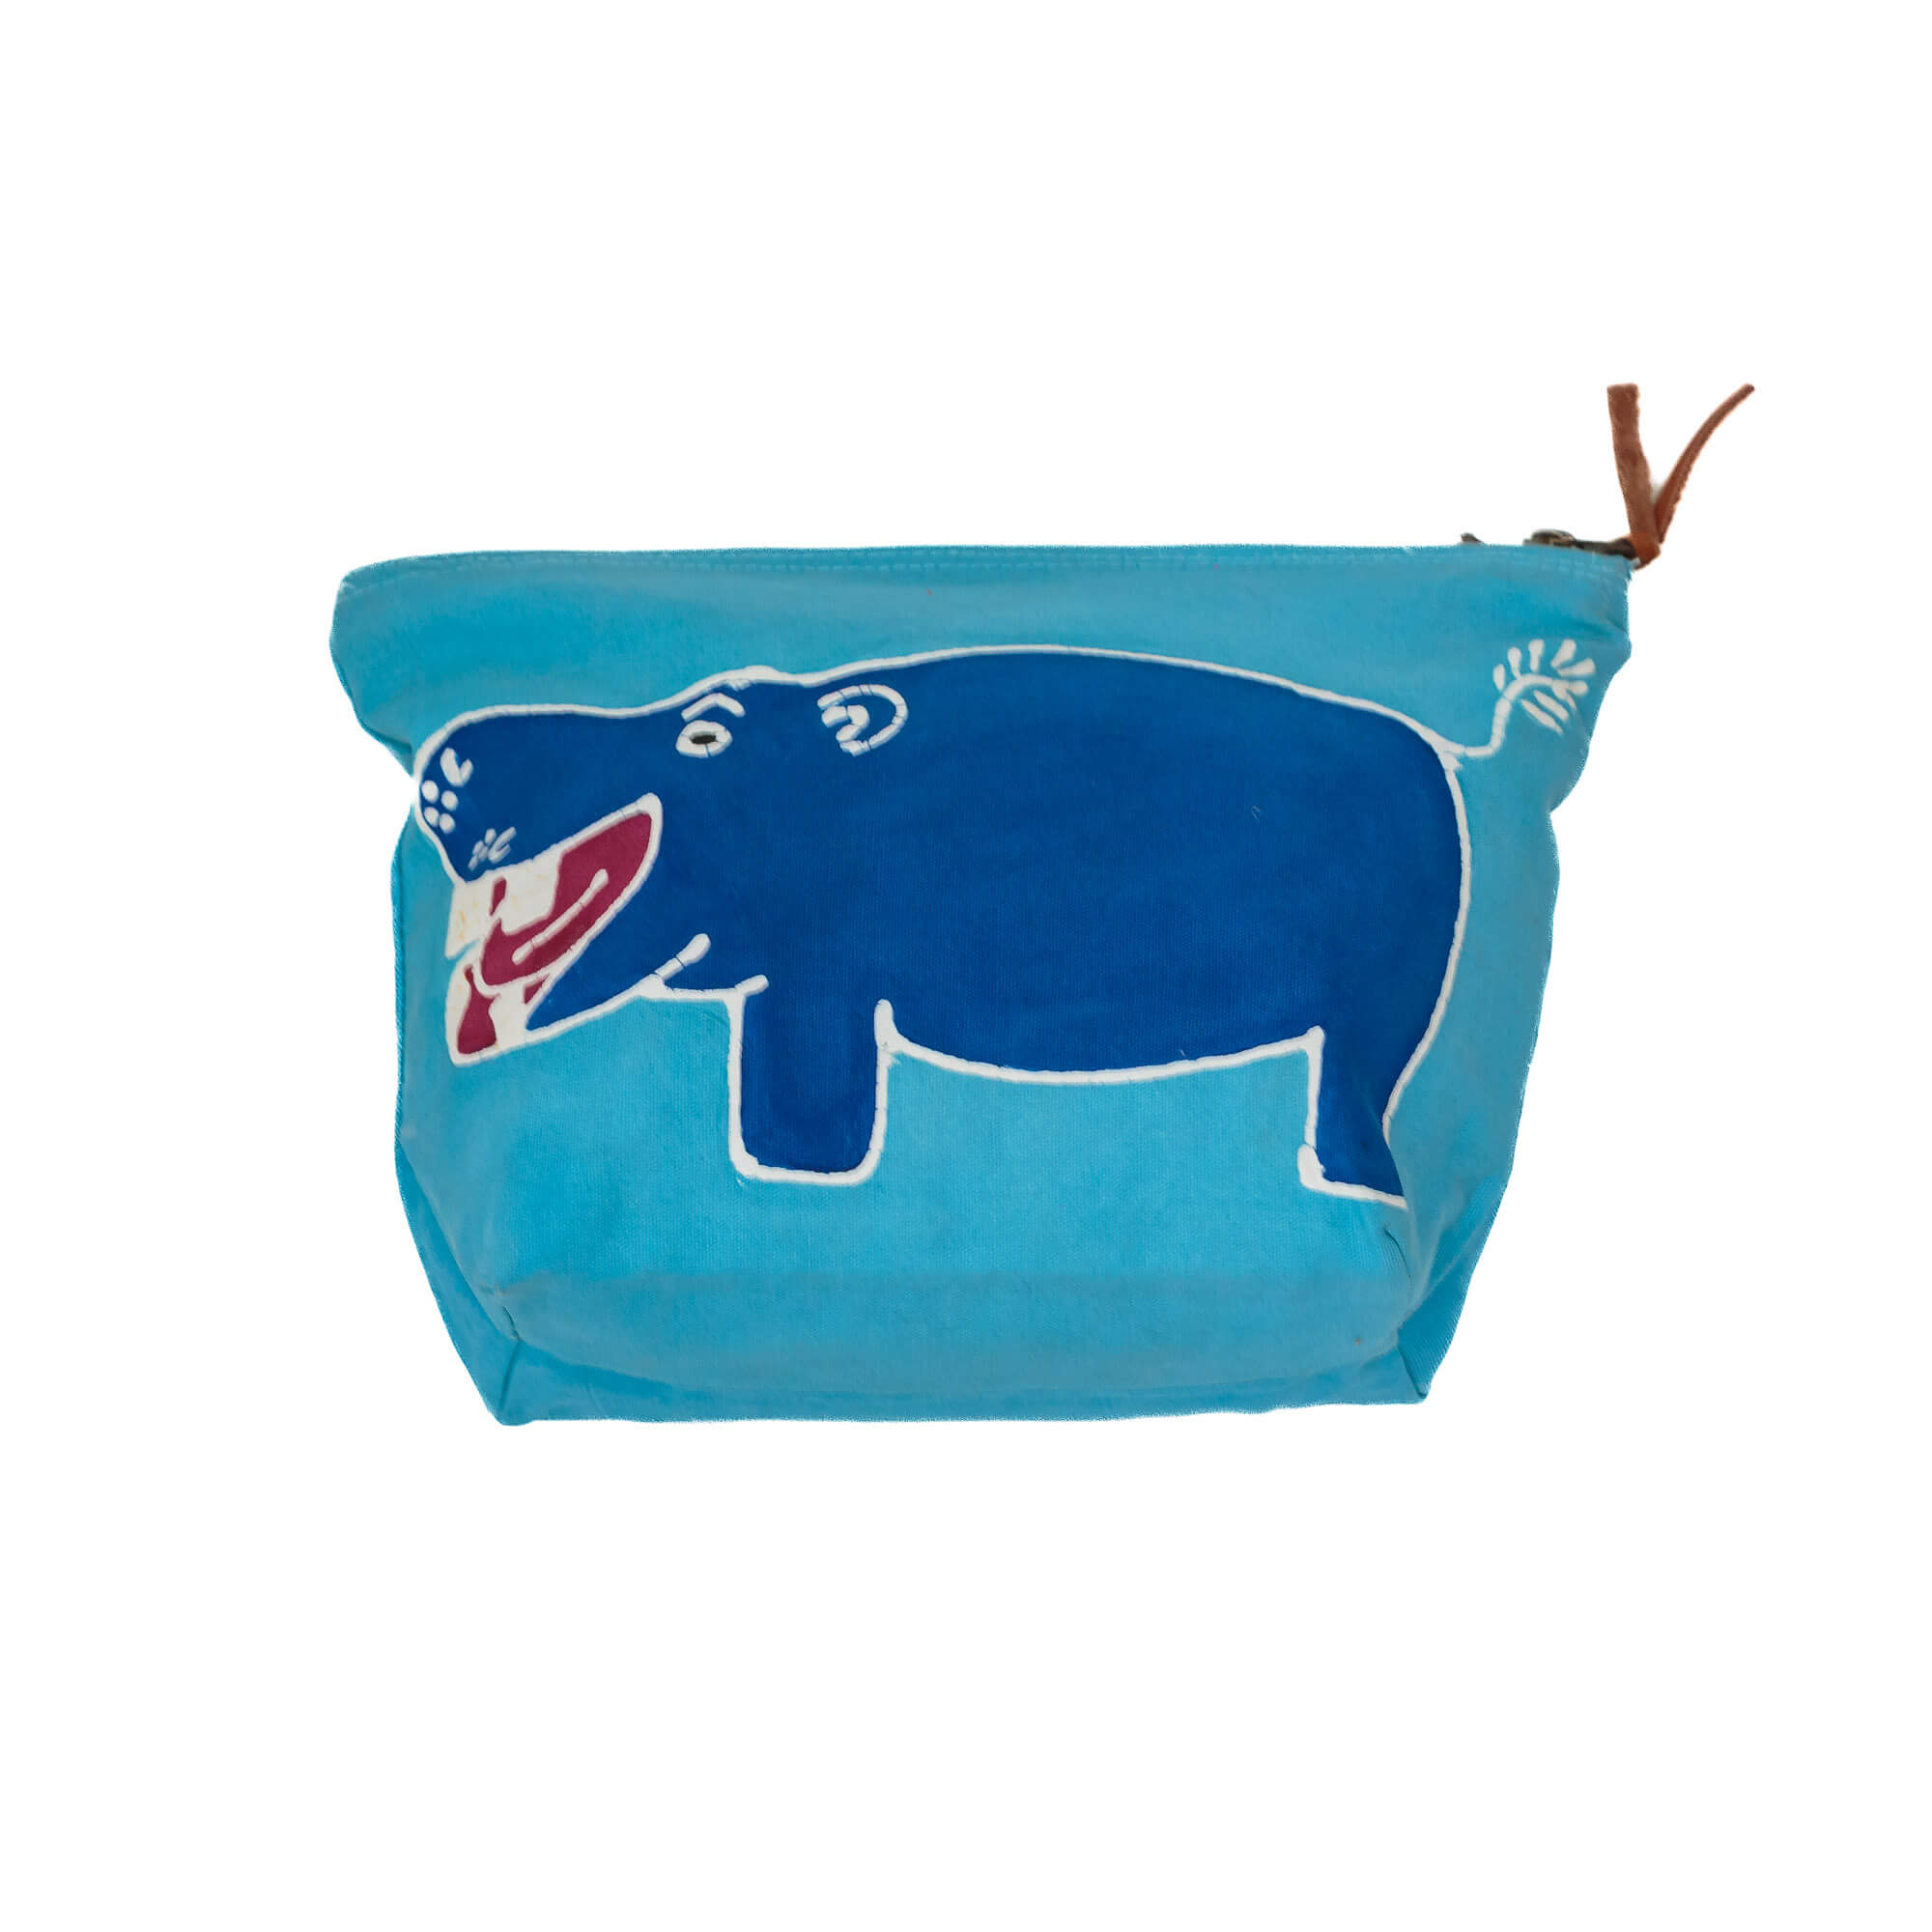 The perfect light blue hippo wash bag, to bring fun into traveling with your kids necessities.